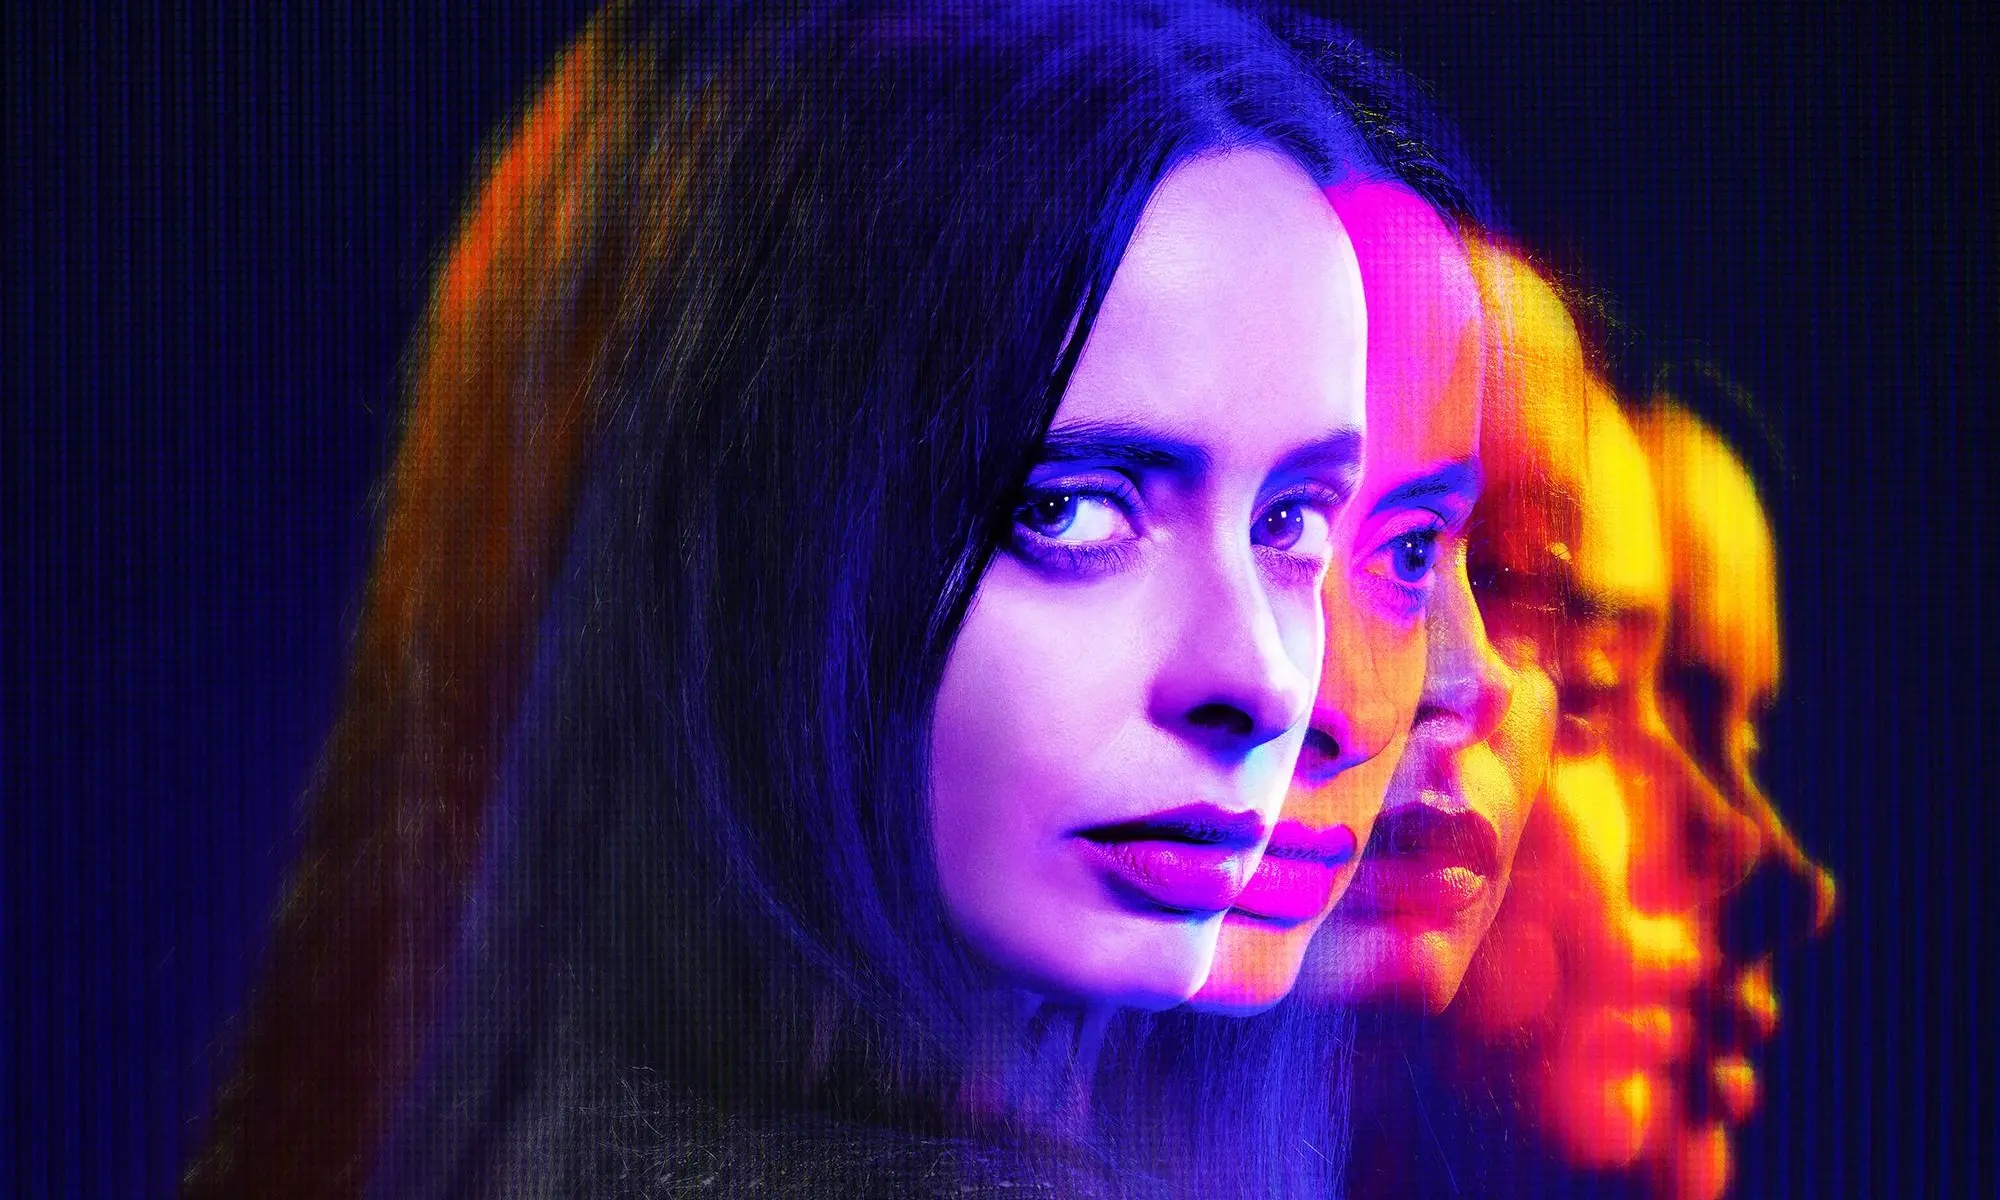 A woman looking into the camera with purple, pink, and yellow light. Copies of herself repeat into the background.